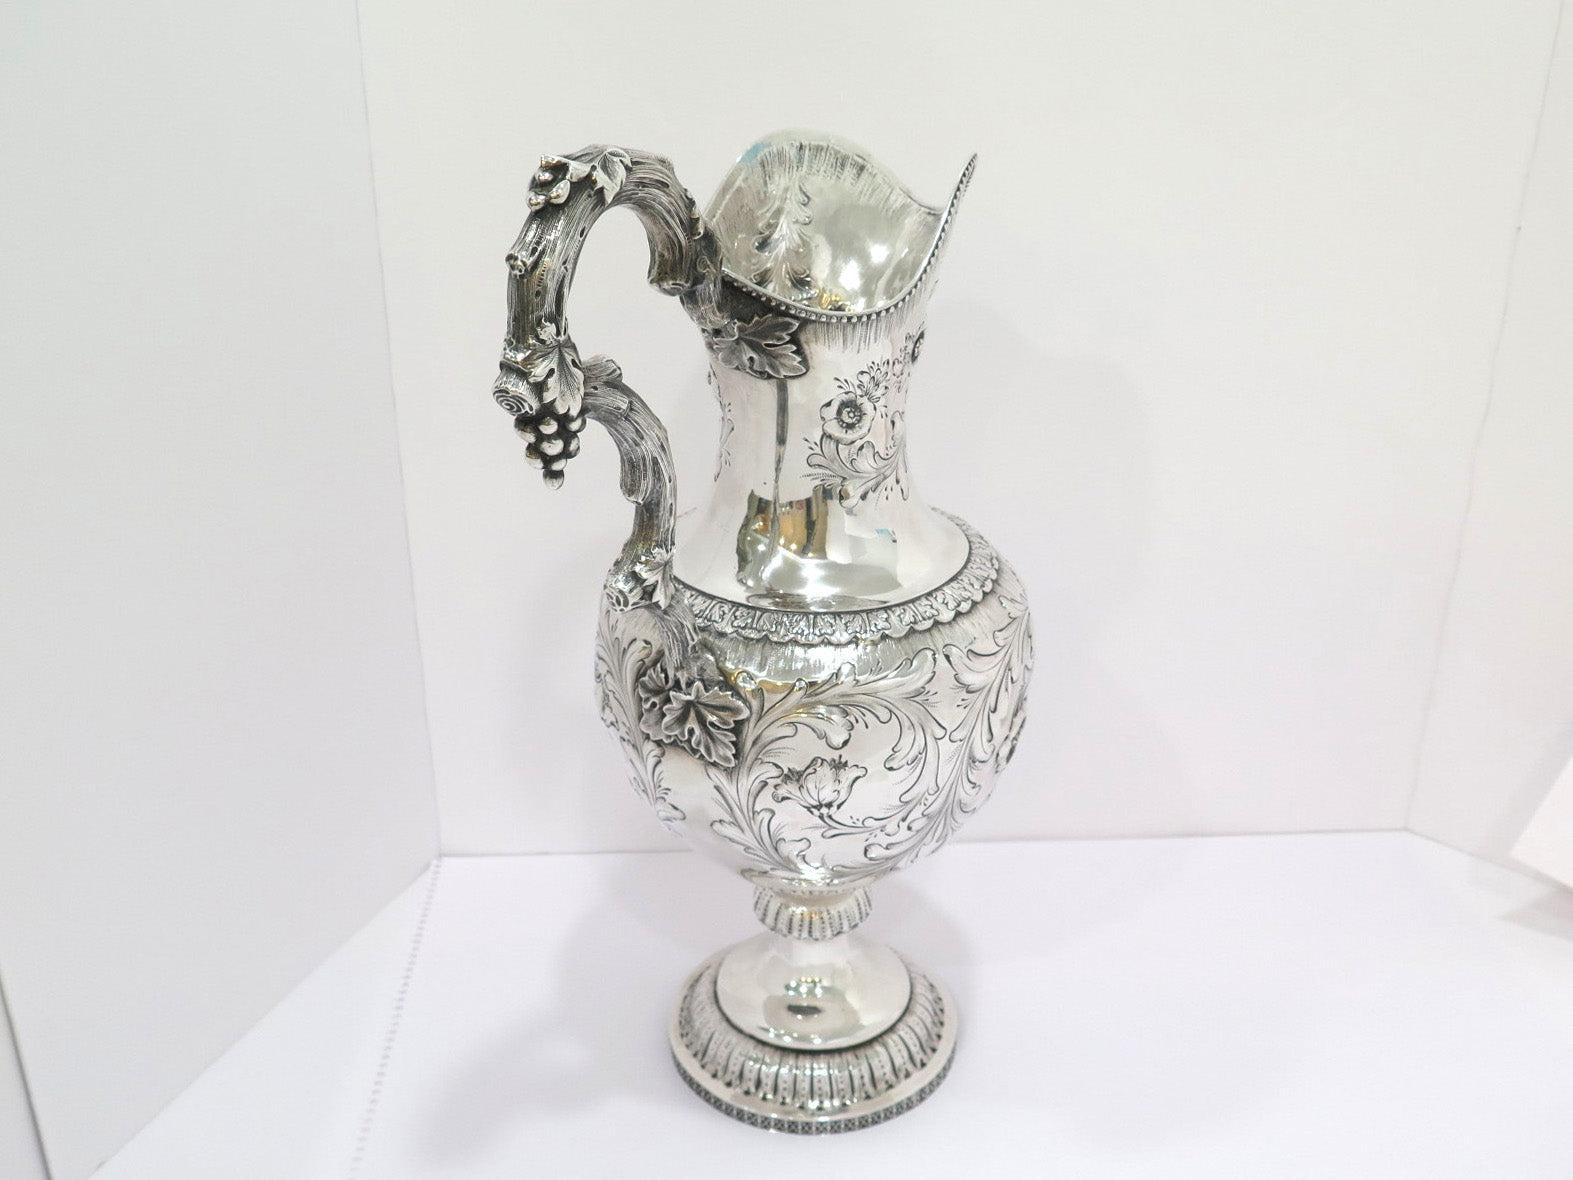 American 18 in - Coin Silver Bailey & Co Antique Floral Repousse Grapevine Handle Pitcher For Sale